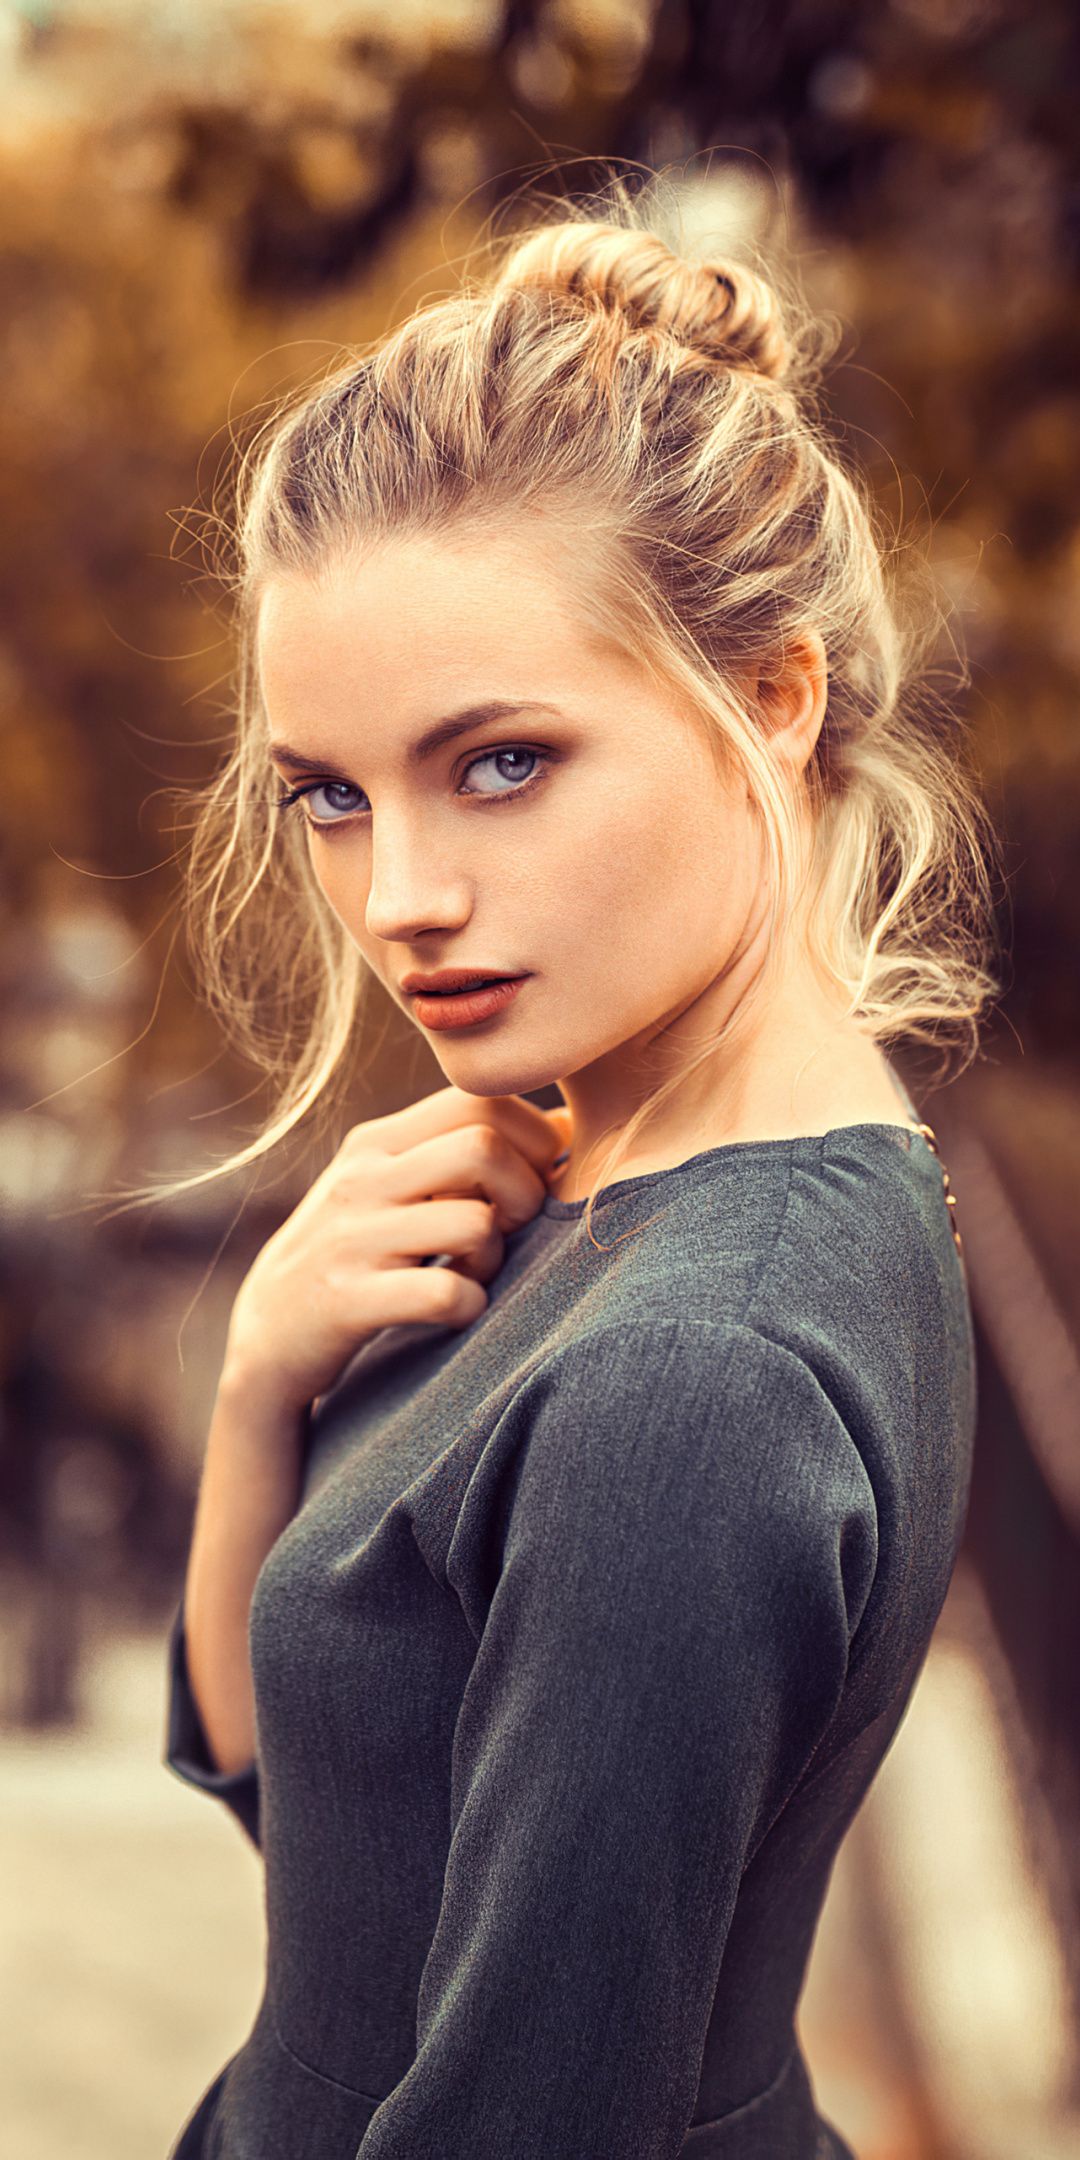 Free download 1080x2160 Blonde and beautiful woman portrait wallpaper [1080x2160] for your Desktop, Mobile & Tablet. Explore Women Wallpaper. Wallpaper Women, Women Wallpaper, Black Women Wallpaper